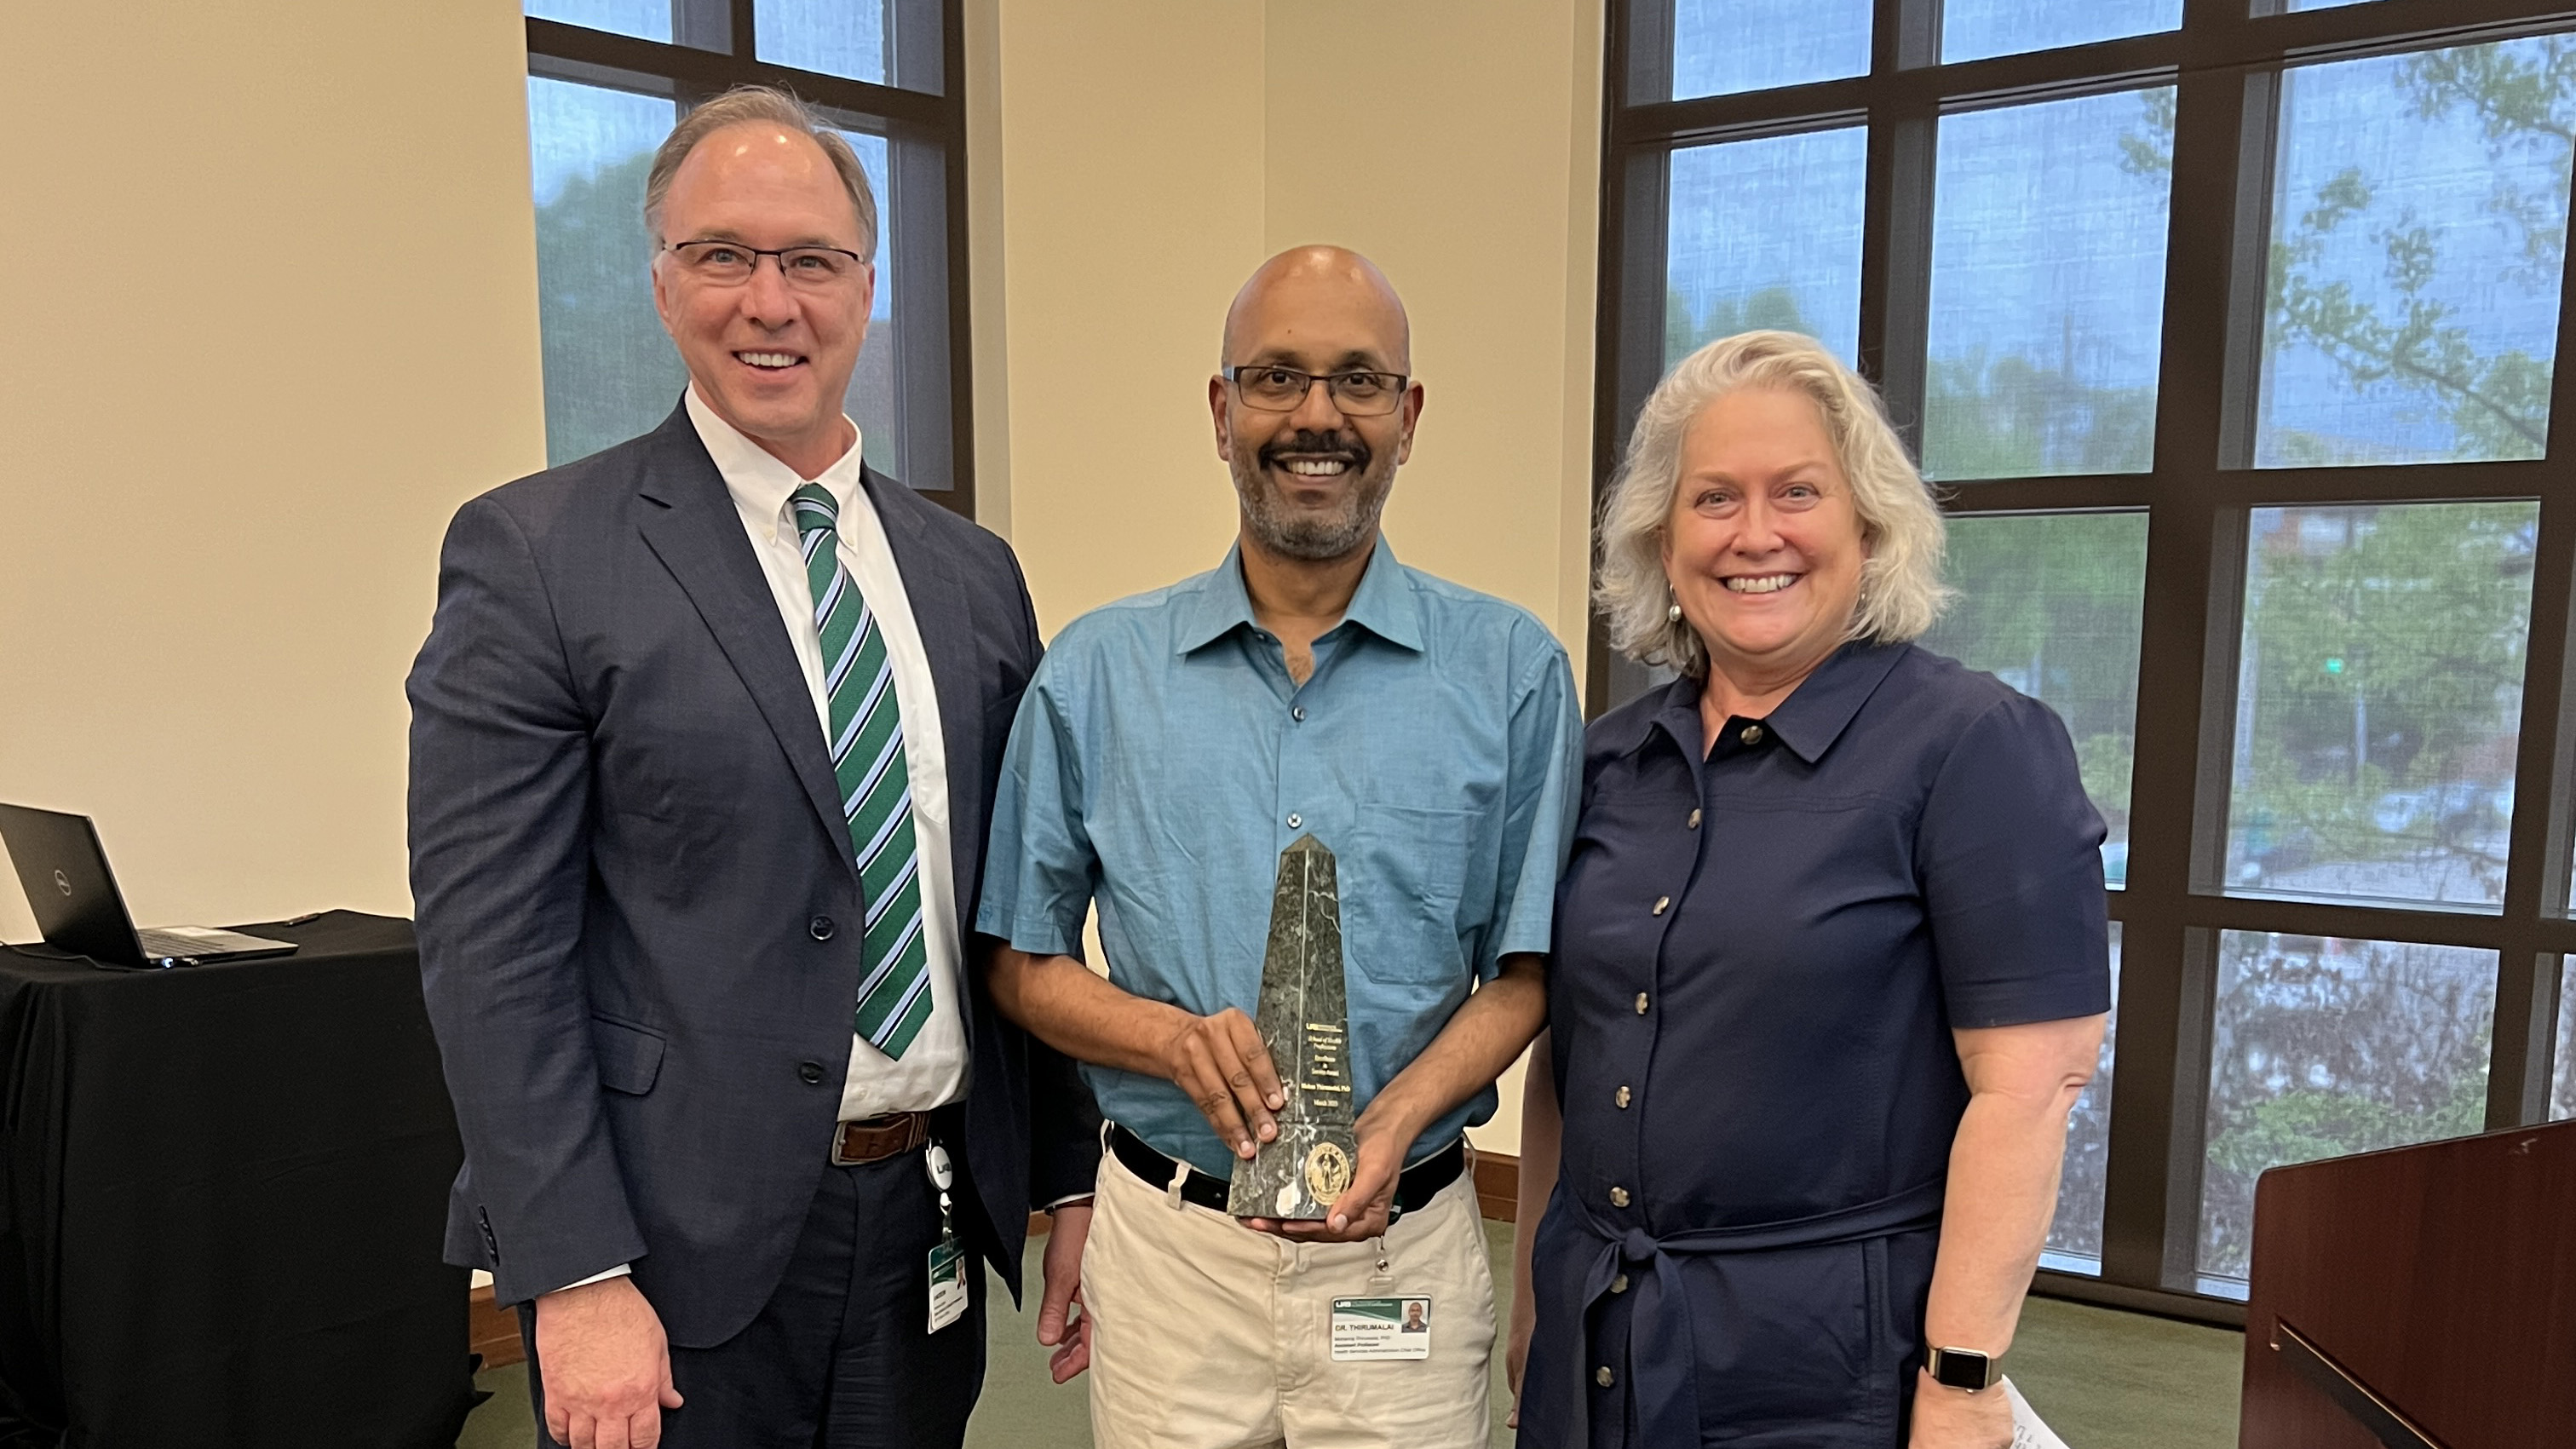 Excellence in Service Award - Faculty: Mohanraj Thirumalai, Health Services Administration